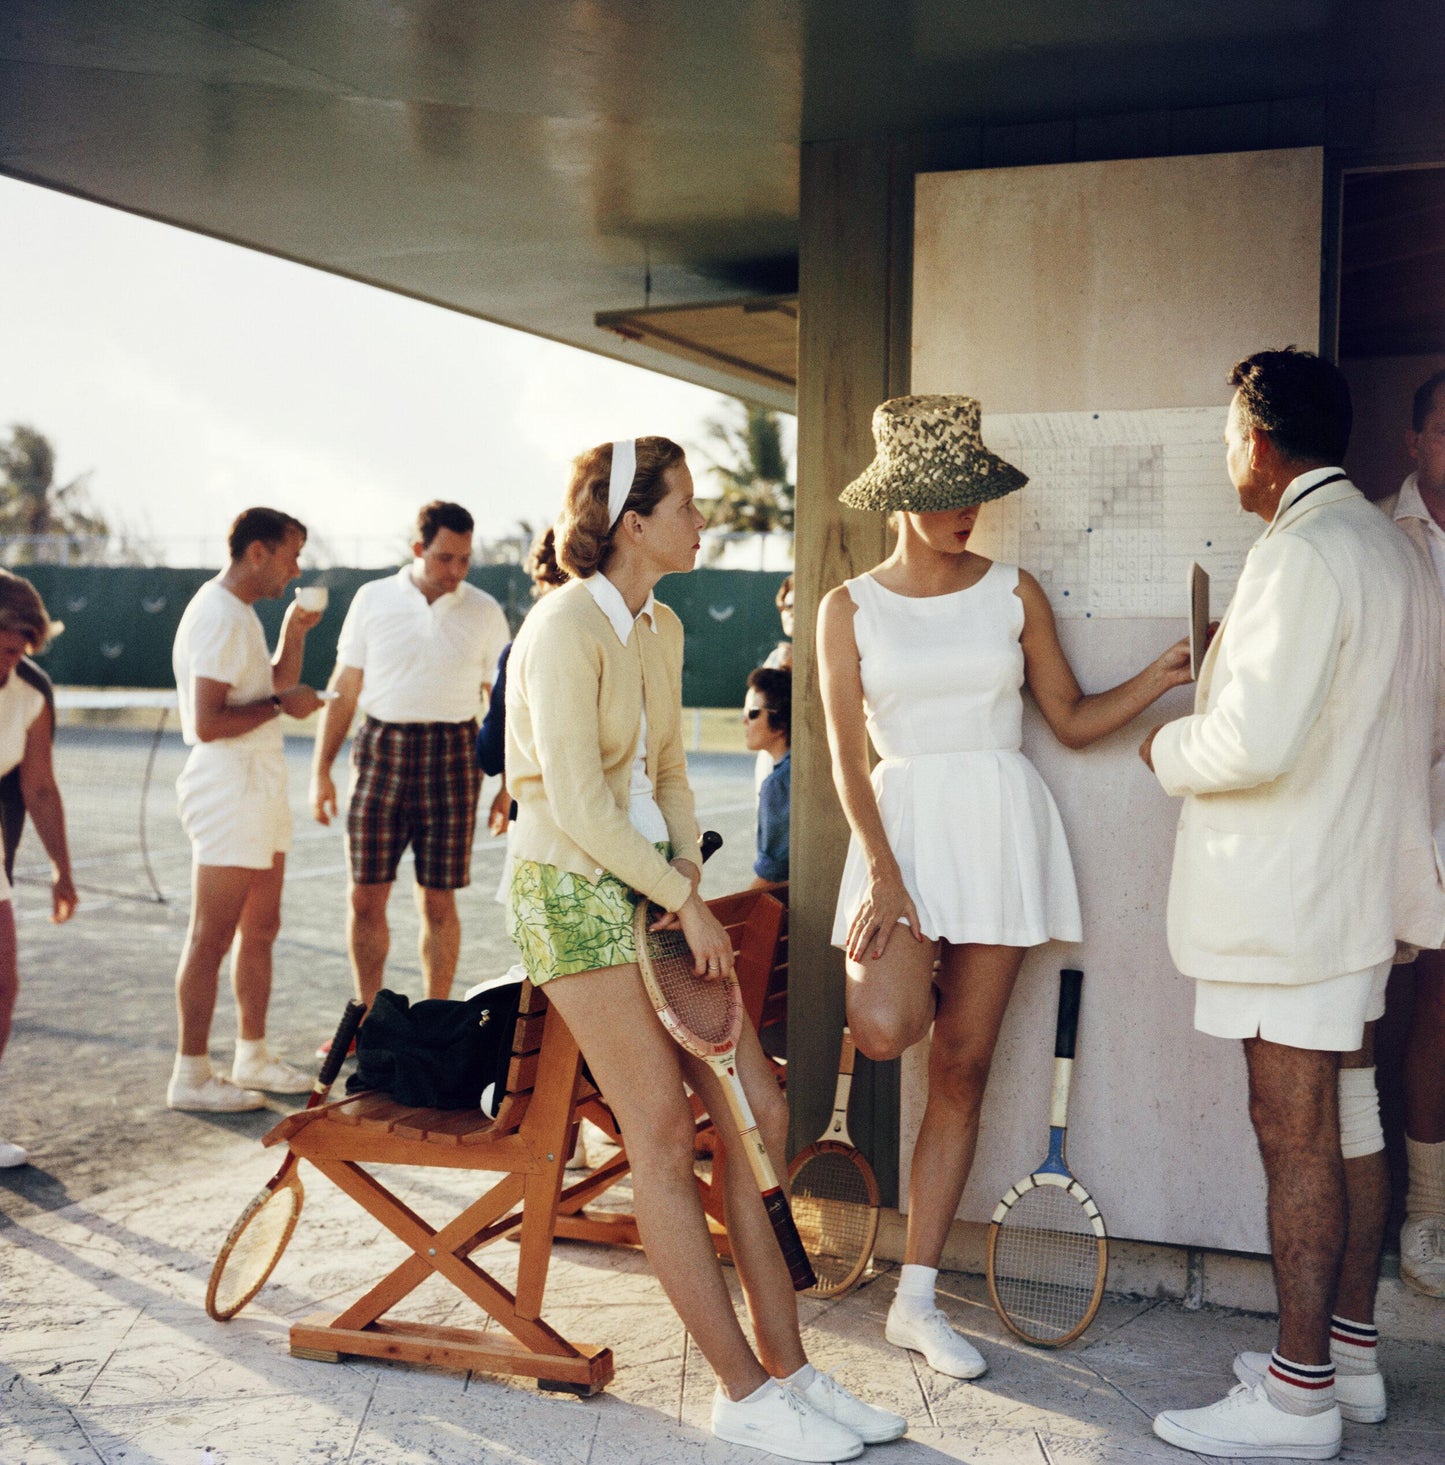 Slim Aarons: Tennis in The Bahamas photo for sale Getty Images Gallery